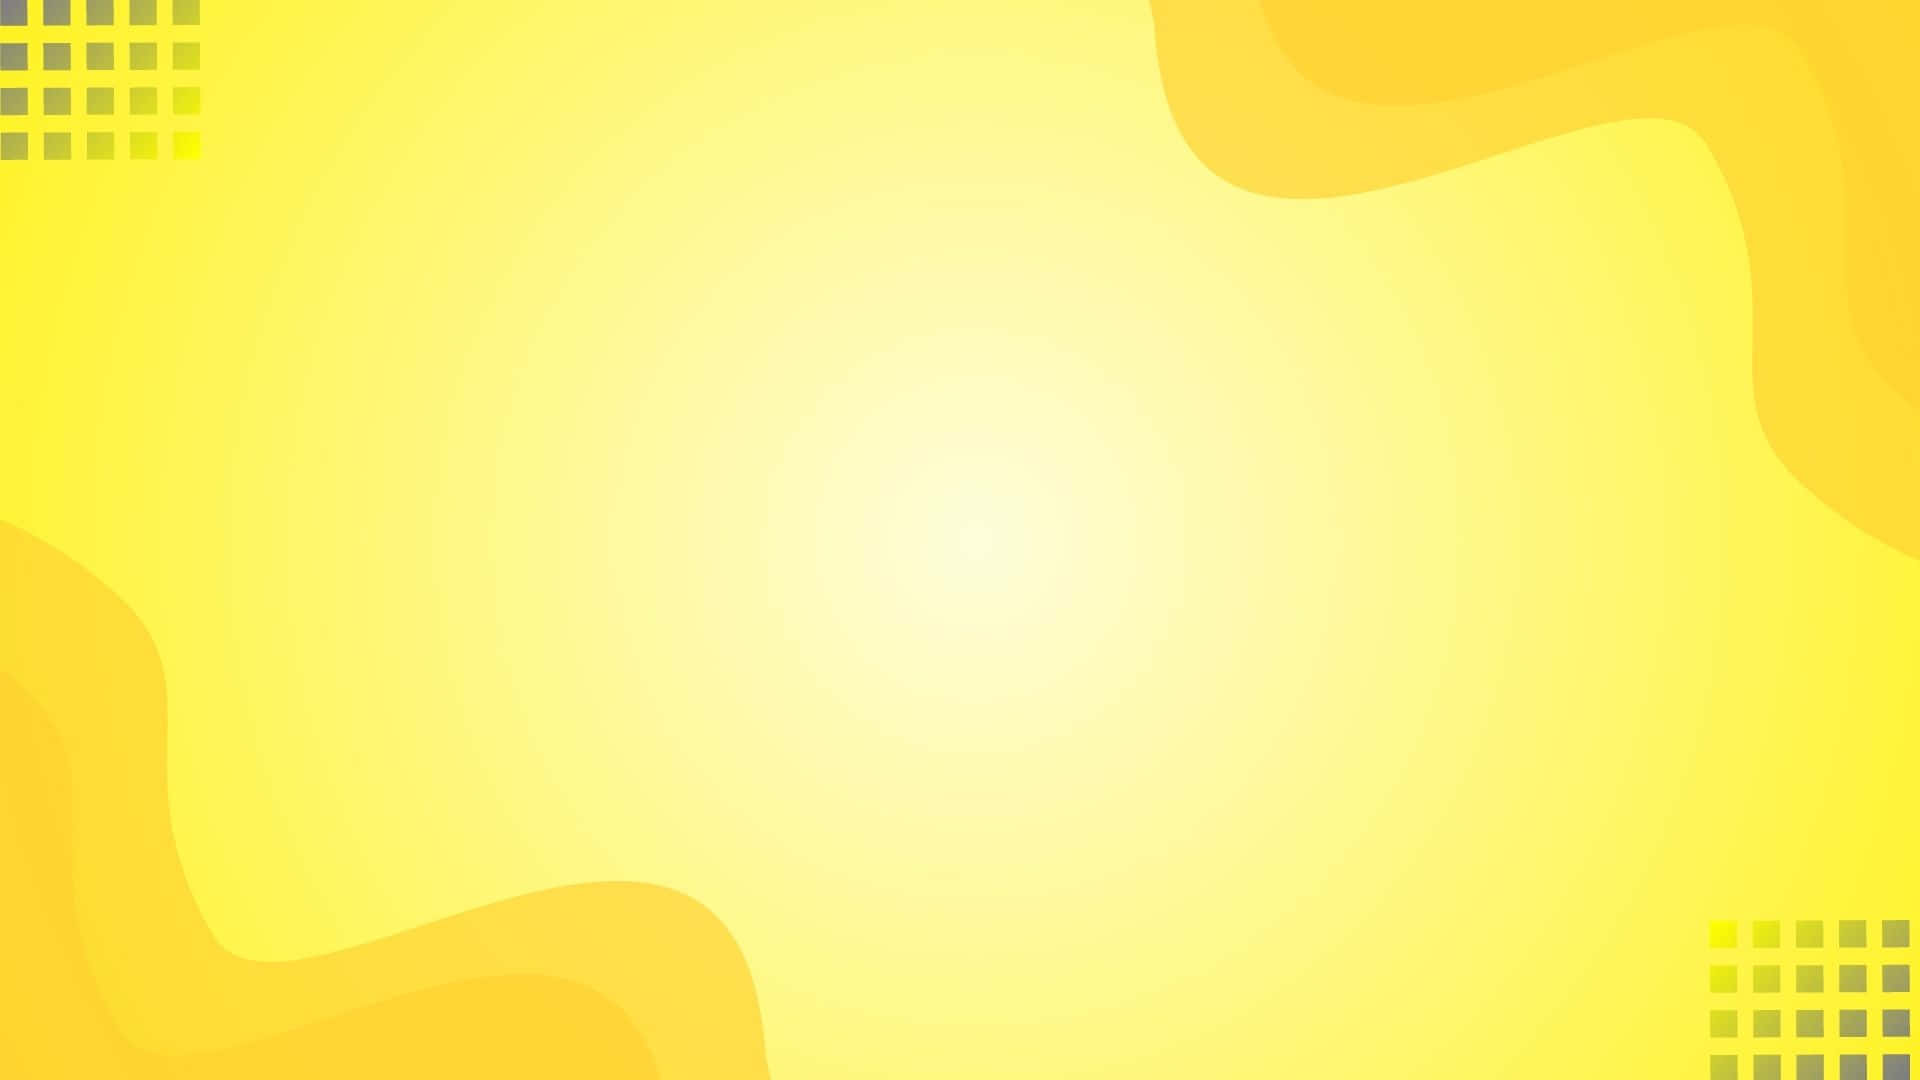 A bright and vibrant yellow aesthetic background